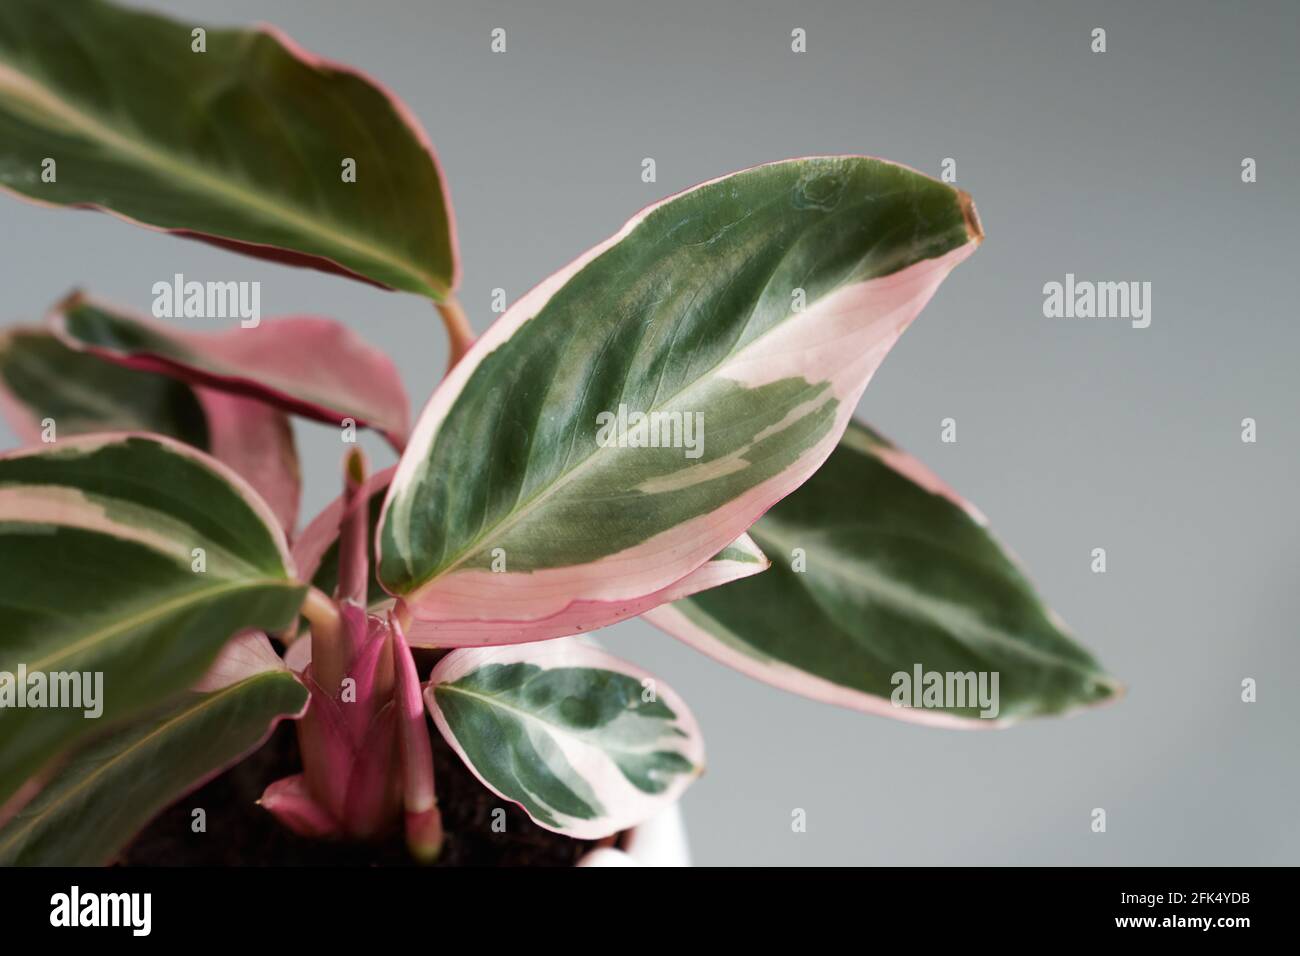 Close up of a calathea triostar plant with pink and green leafs. Stock Photo